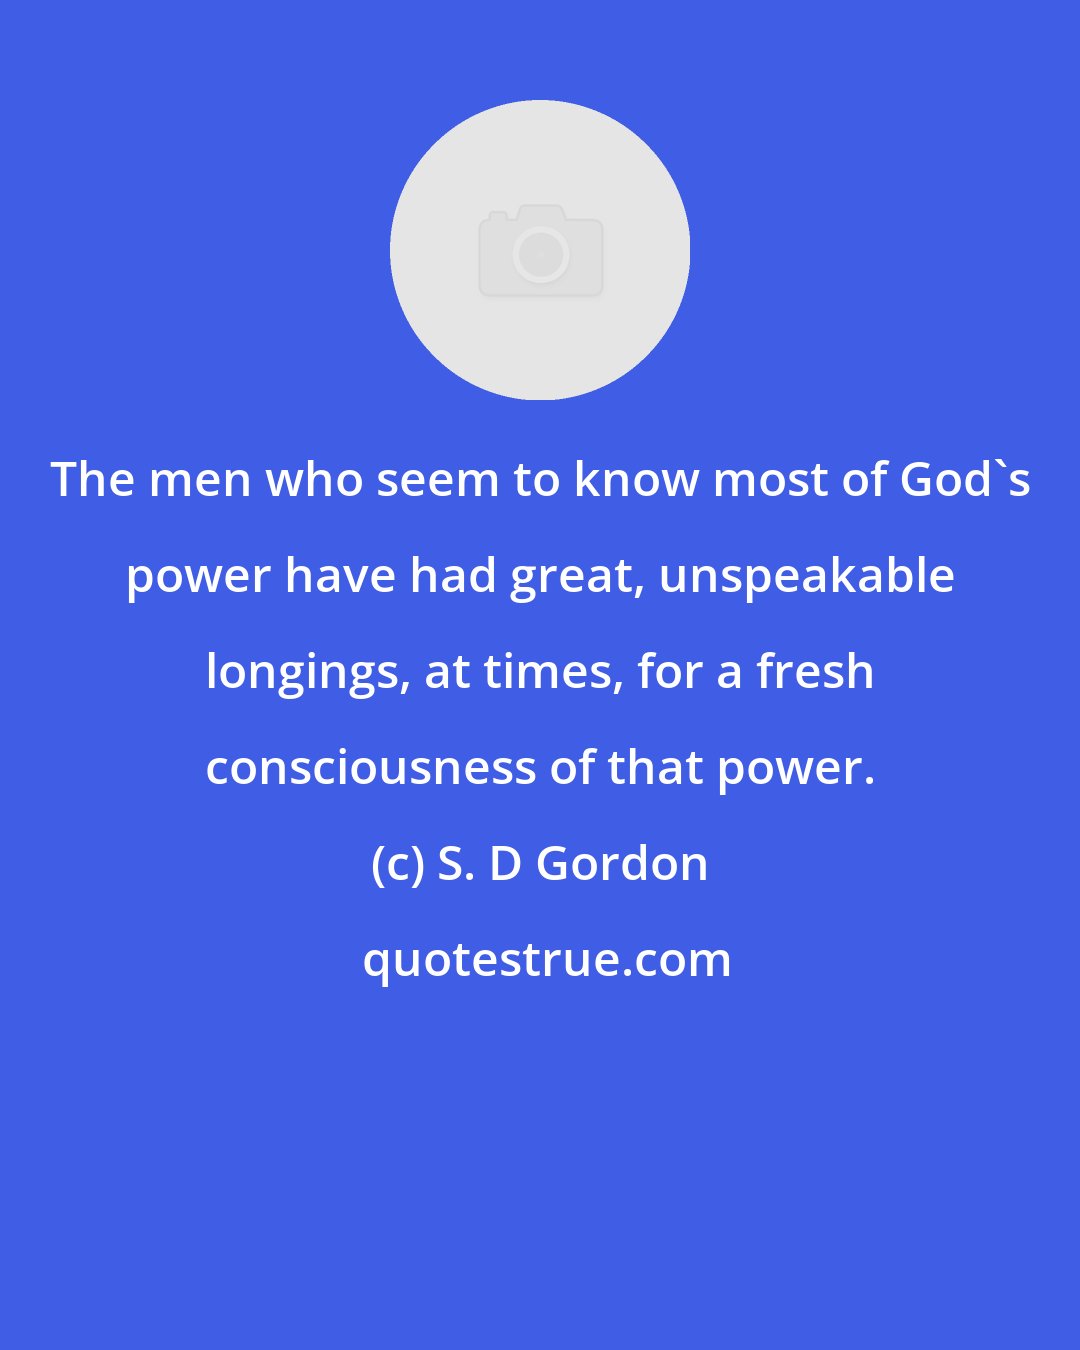 S. D Gordon: The men who seem to know most of God's power have had great, unspeakable longings, at times, for a fresh consciousness of that power.